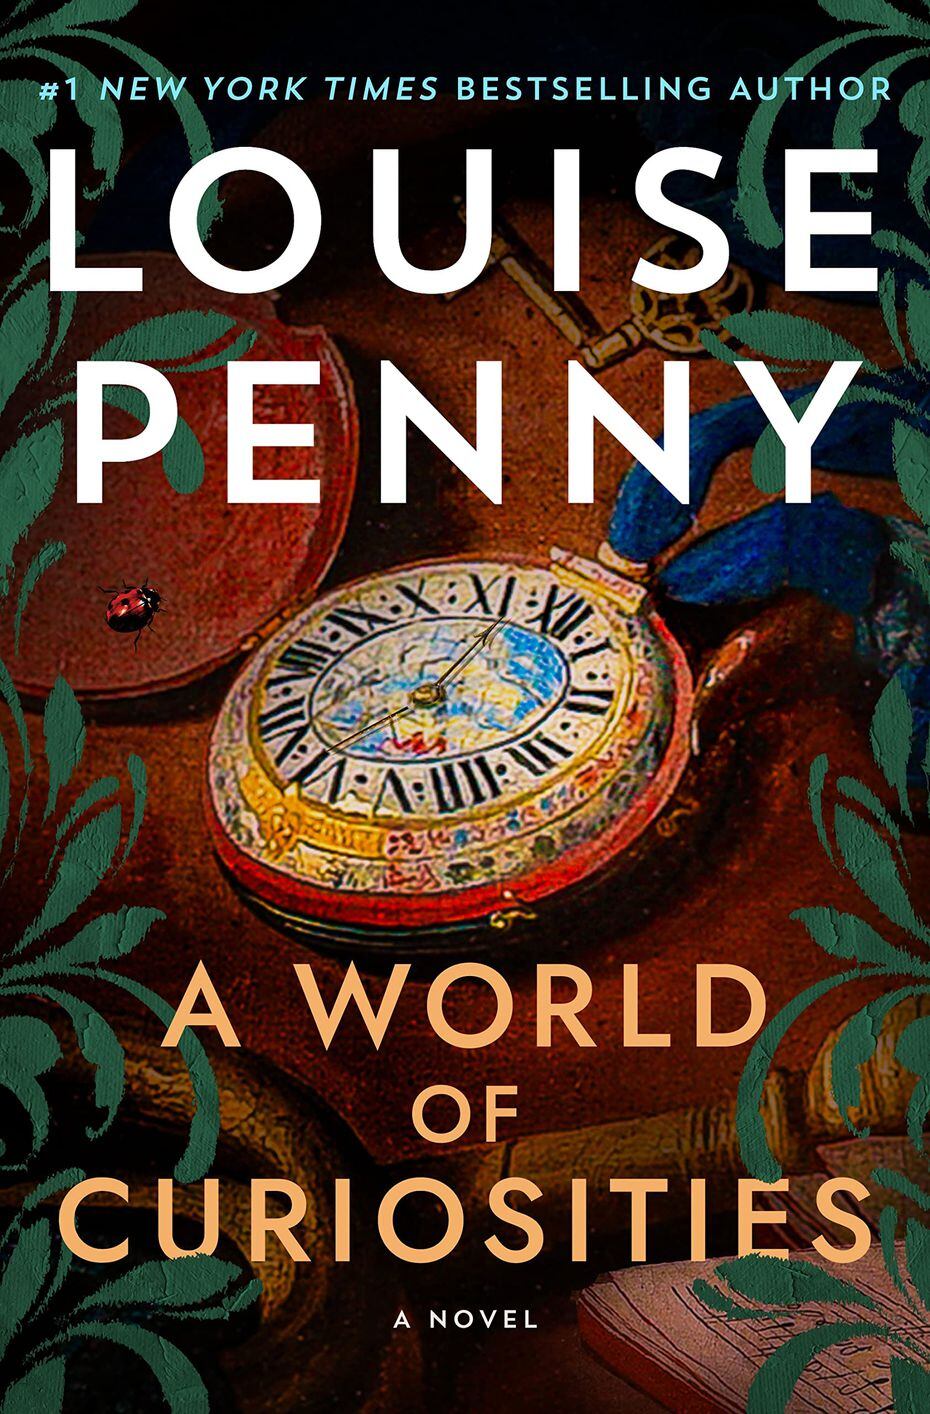 Louise-Penny - Pittsburgh Arts & Lectures